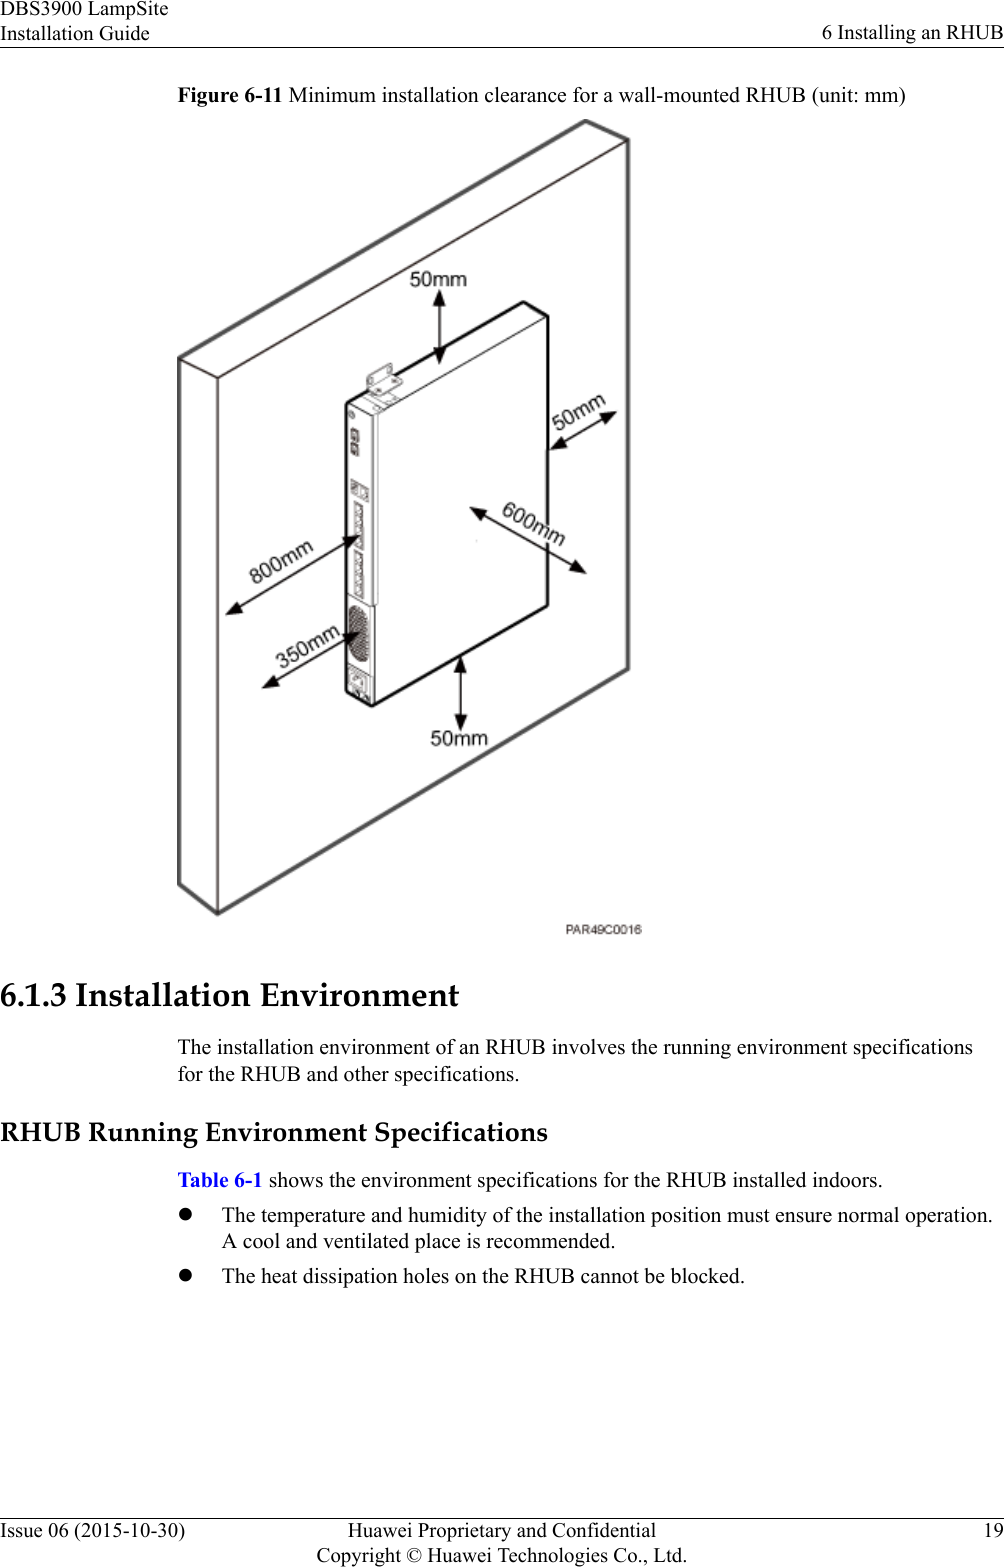 Figure 6-11 Minimum installation clearance for a wall-mounted RHUB (unit: mm)6.1.3 Installation EnvironmentThe installation environment of an RHUB involves the running environment specificationsfor the RHUB and other specifications.RHUB Running Environment SpecificationsTable 6-1 shows the environment specifications for the RHUB installed indoors.lThe temperature and humidity of the installation position must ensure normal operation.A cool and ventilated place is recommended.lThe heat dissipation holes on the RHUB cannot be blocked.DBS3900 LampSiteInstallation Guide 6 Installing an RHUBIssue 06 (2015-10-30) Huawei Proprietary and ConfidentialCopyright © Huawei Technologies Co., Ltd.19